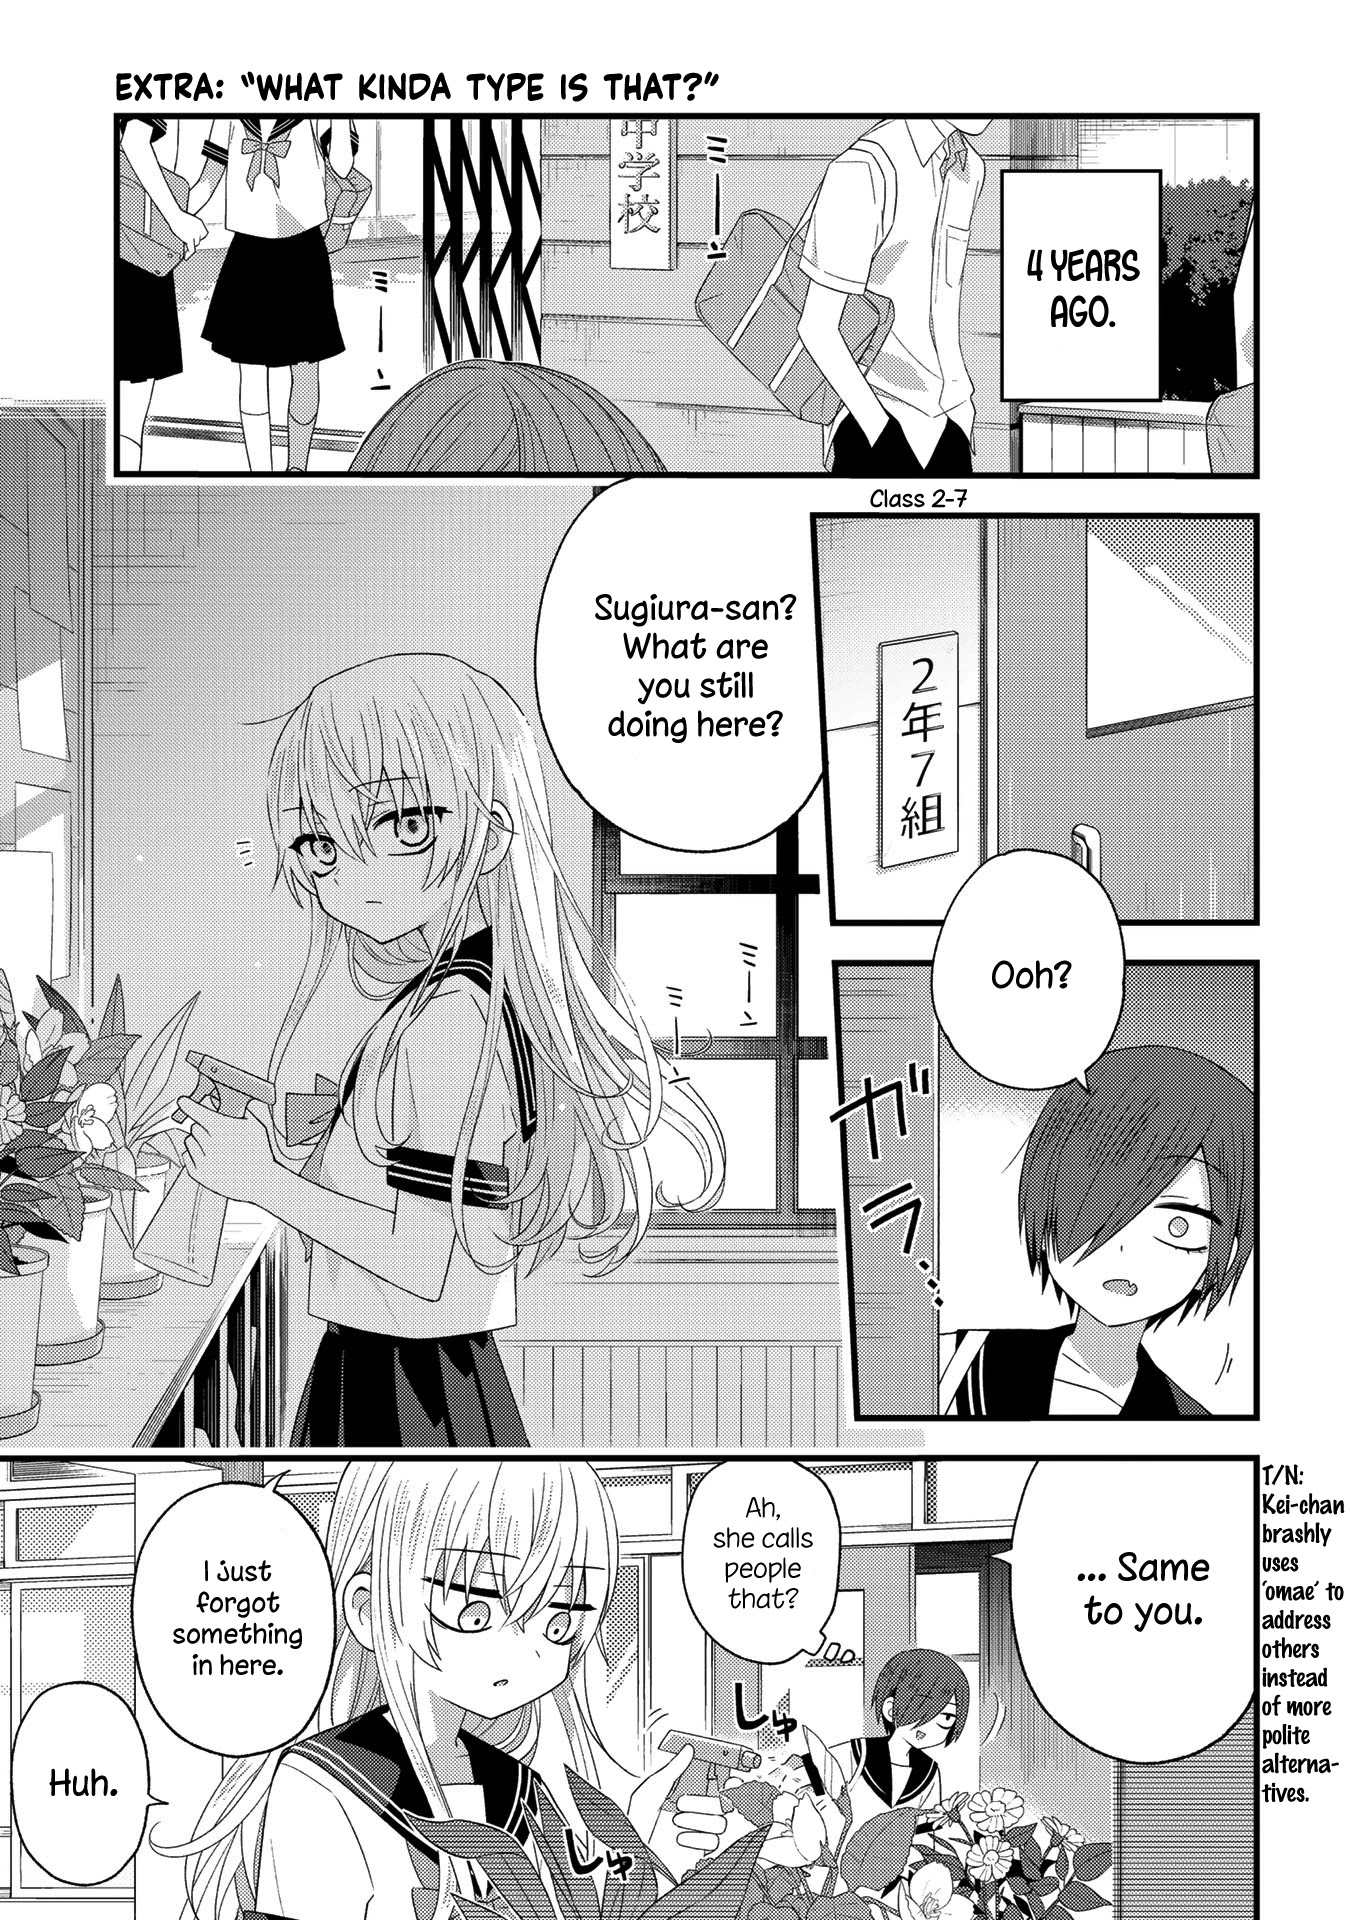 School Zone (Ningiyau) Chapter 29.3: Extra 3: What Kinda Type Is That? - Picture 1